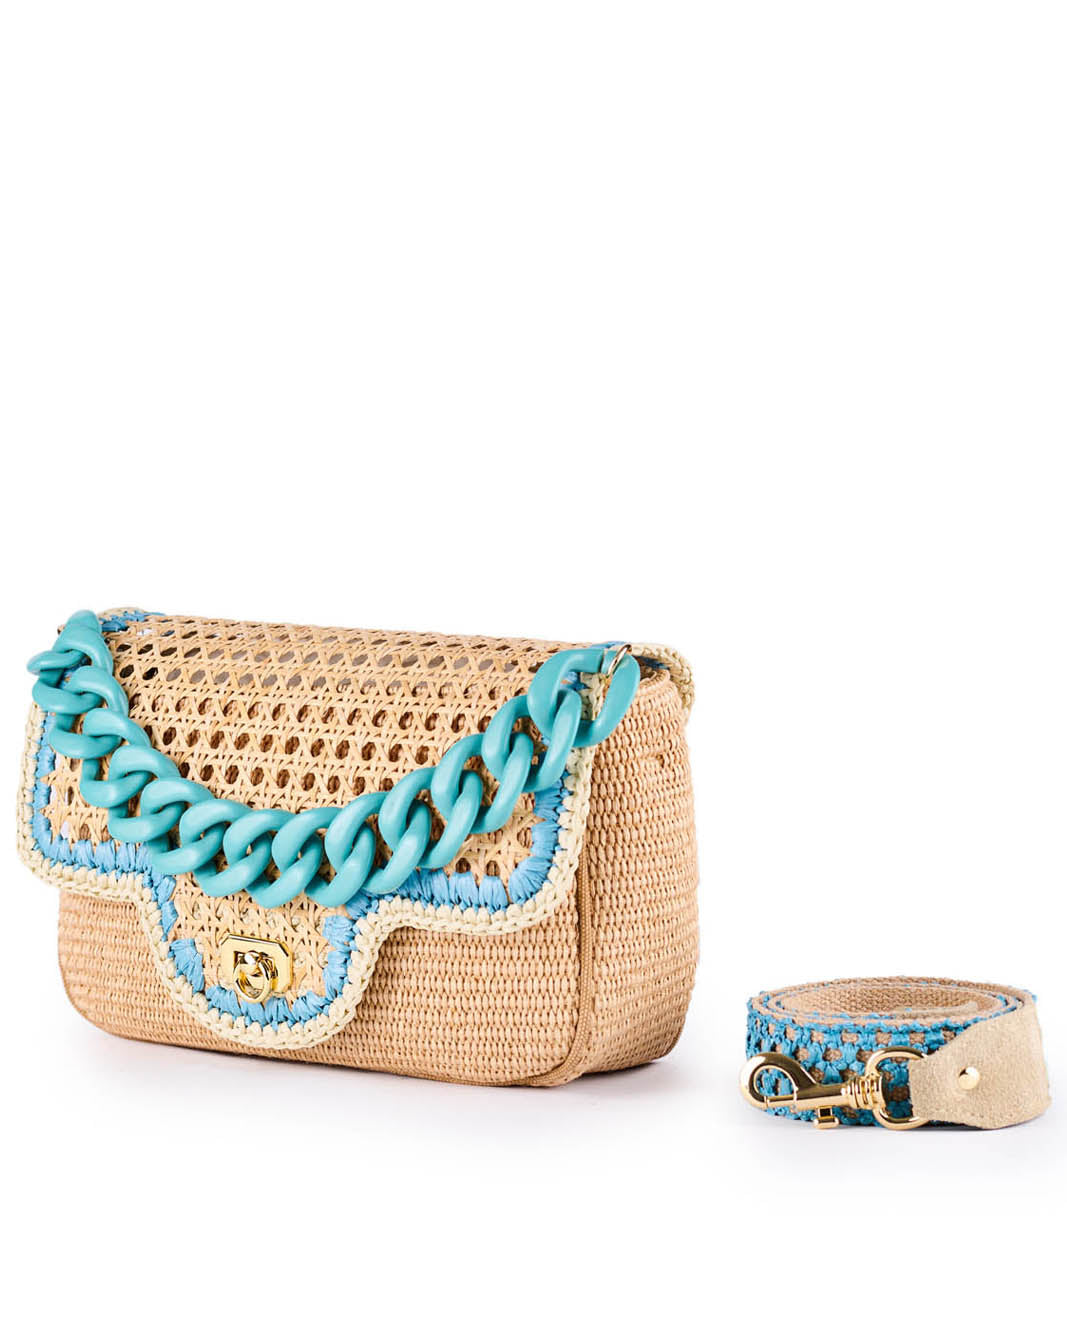 Beige rattan handbag with turquoise chain accents and matching strap